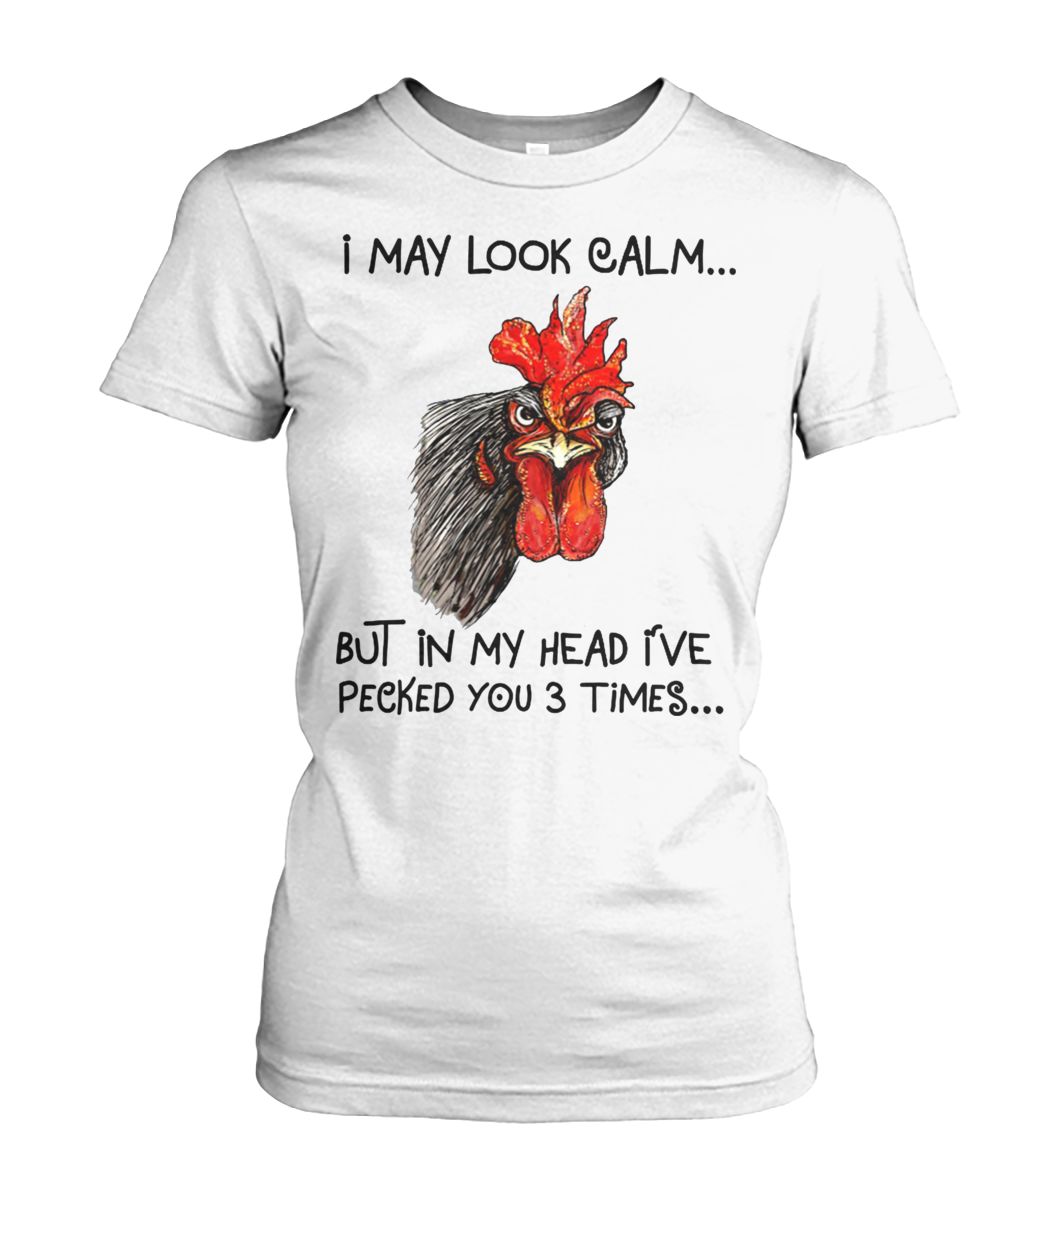 Chicken I may look calm but in my head I've pecked you 3 times women's crew tee